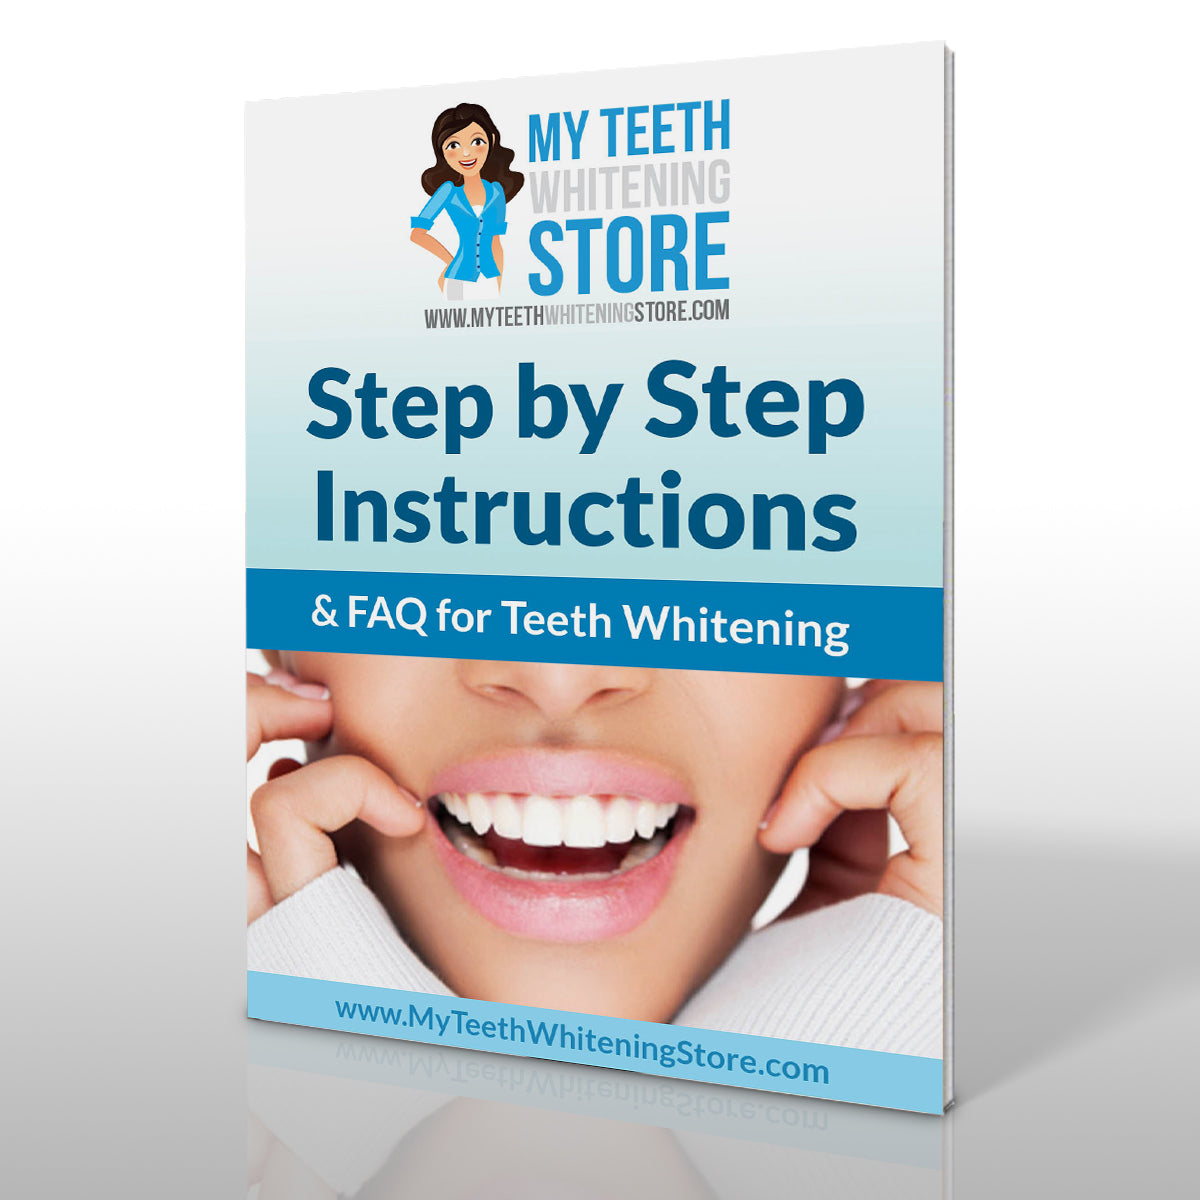 Shop Teeth Whitening Products Online